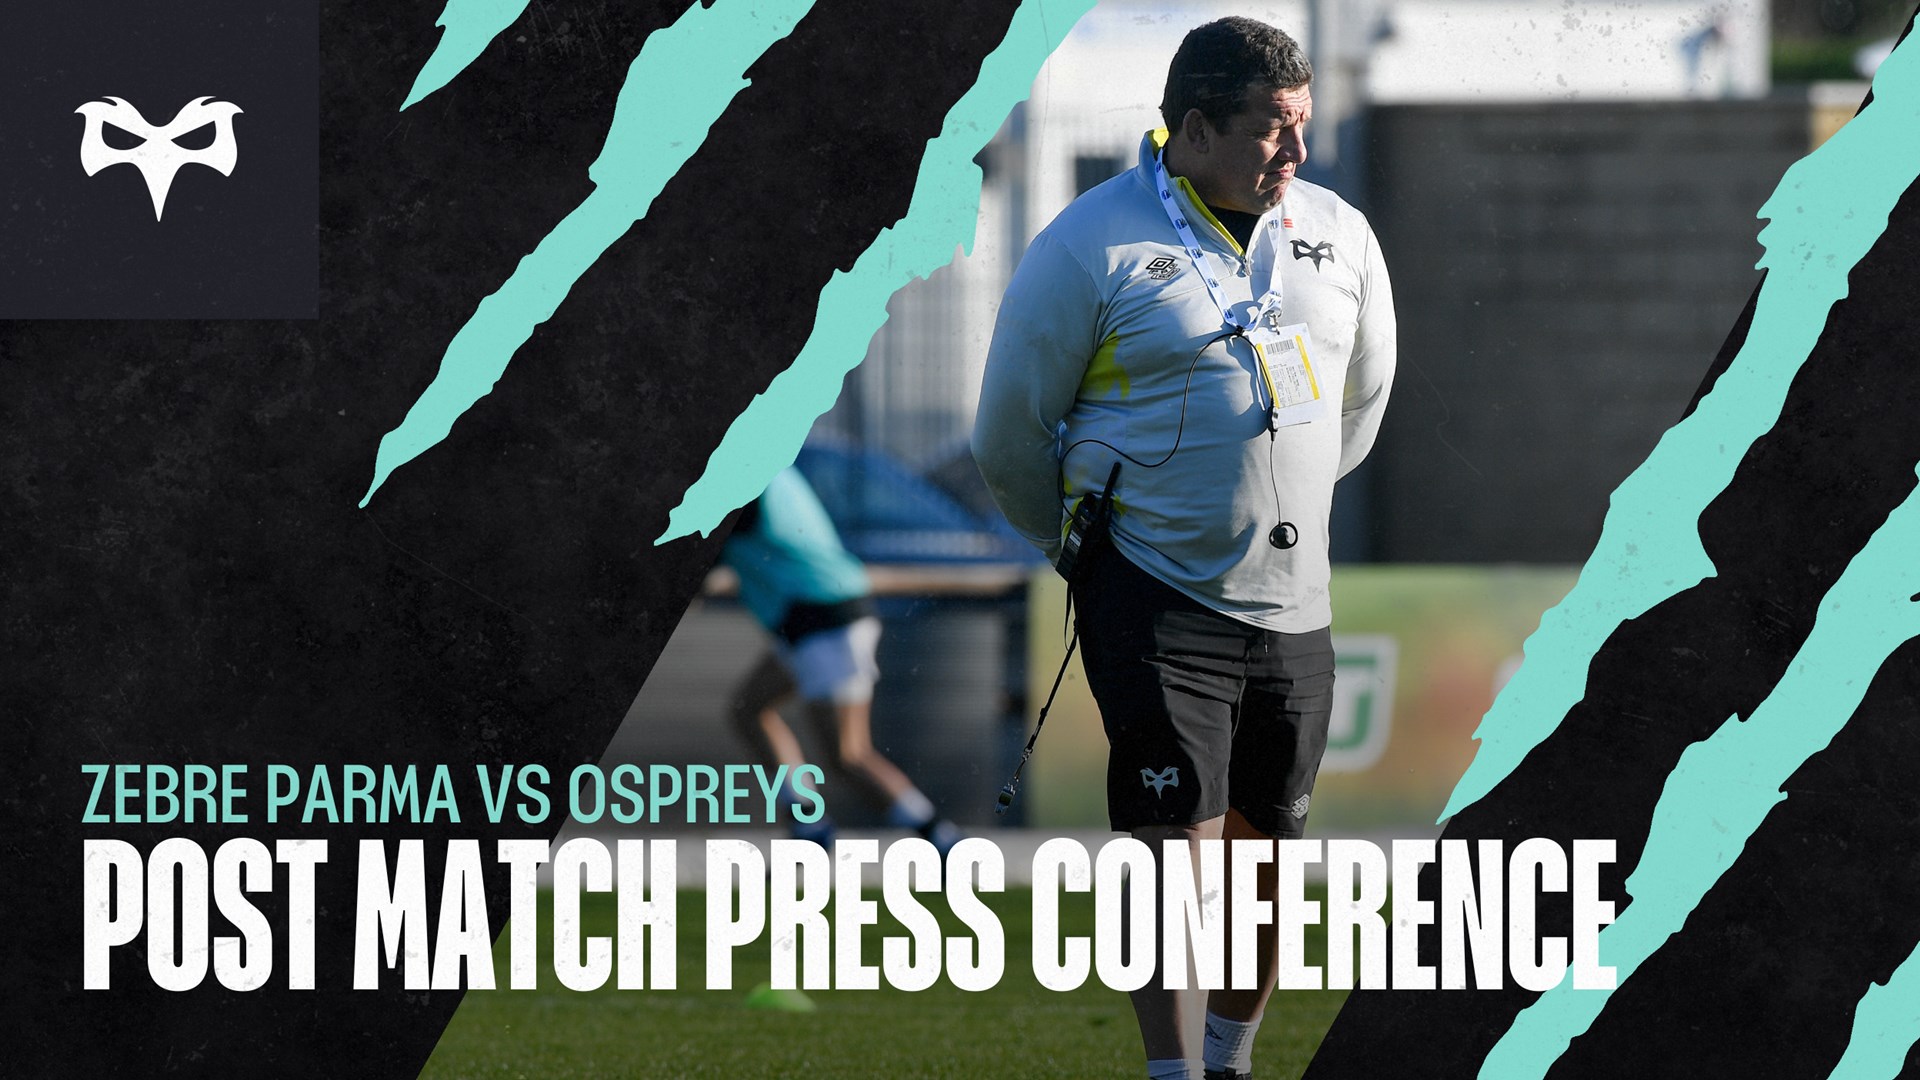 Toby Booth & Michael Collins Post Match Press Conference: Zebre Parma